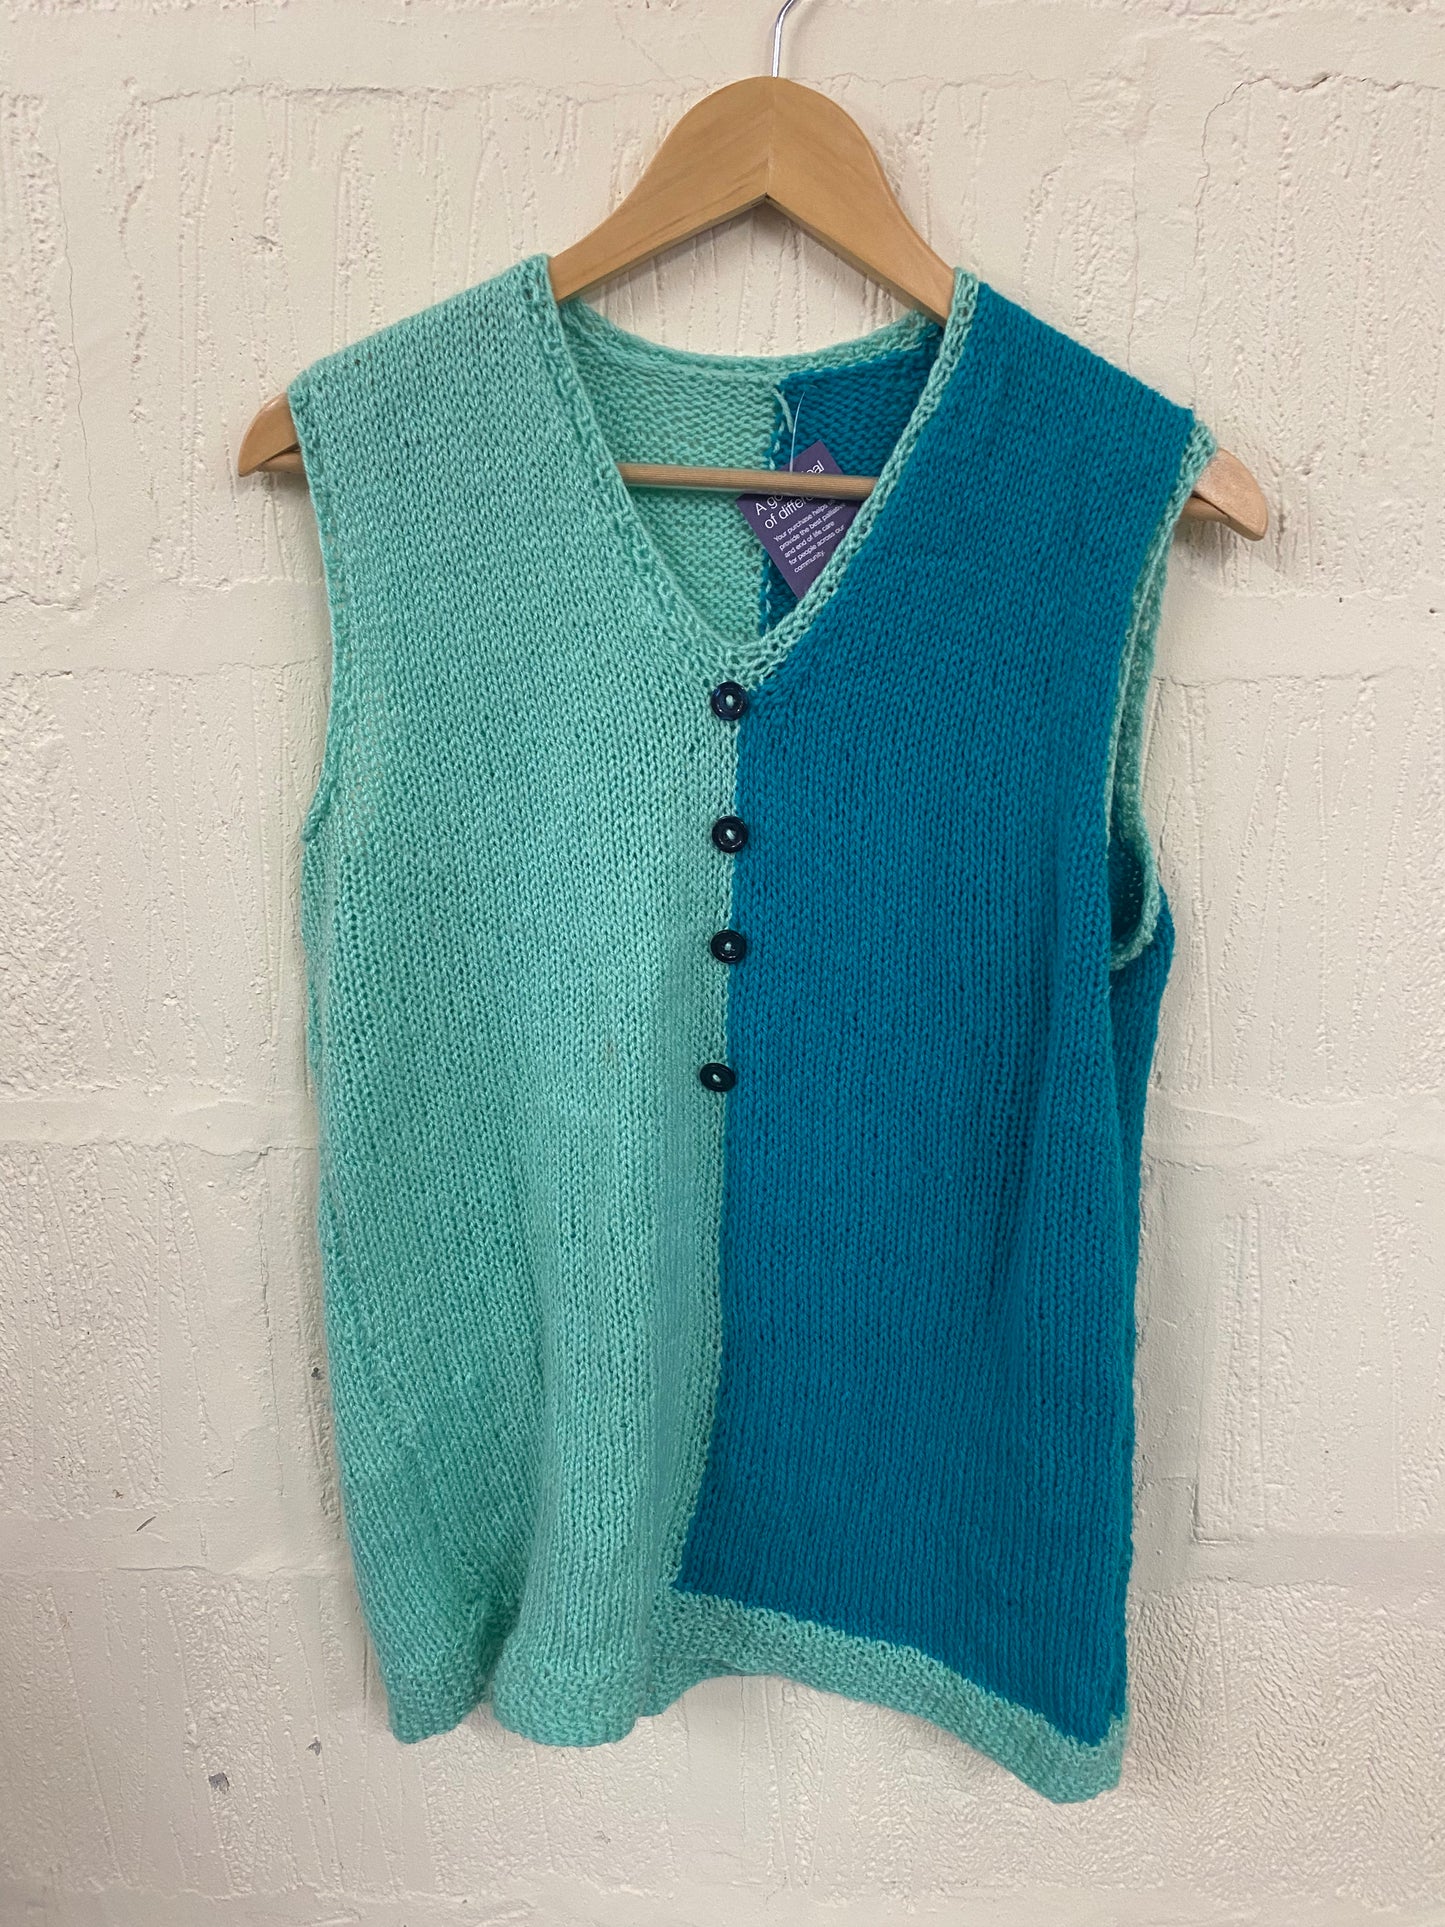 Sleeveless Turquoise and Mint Jumper  Size 12